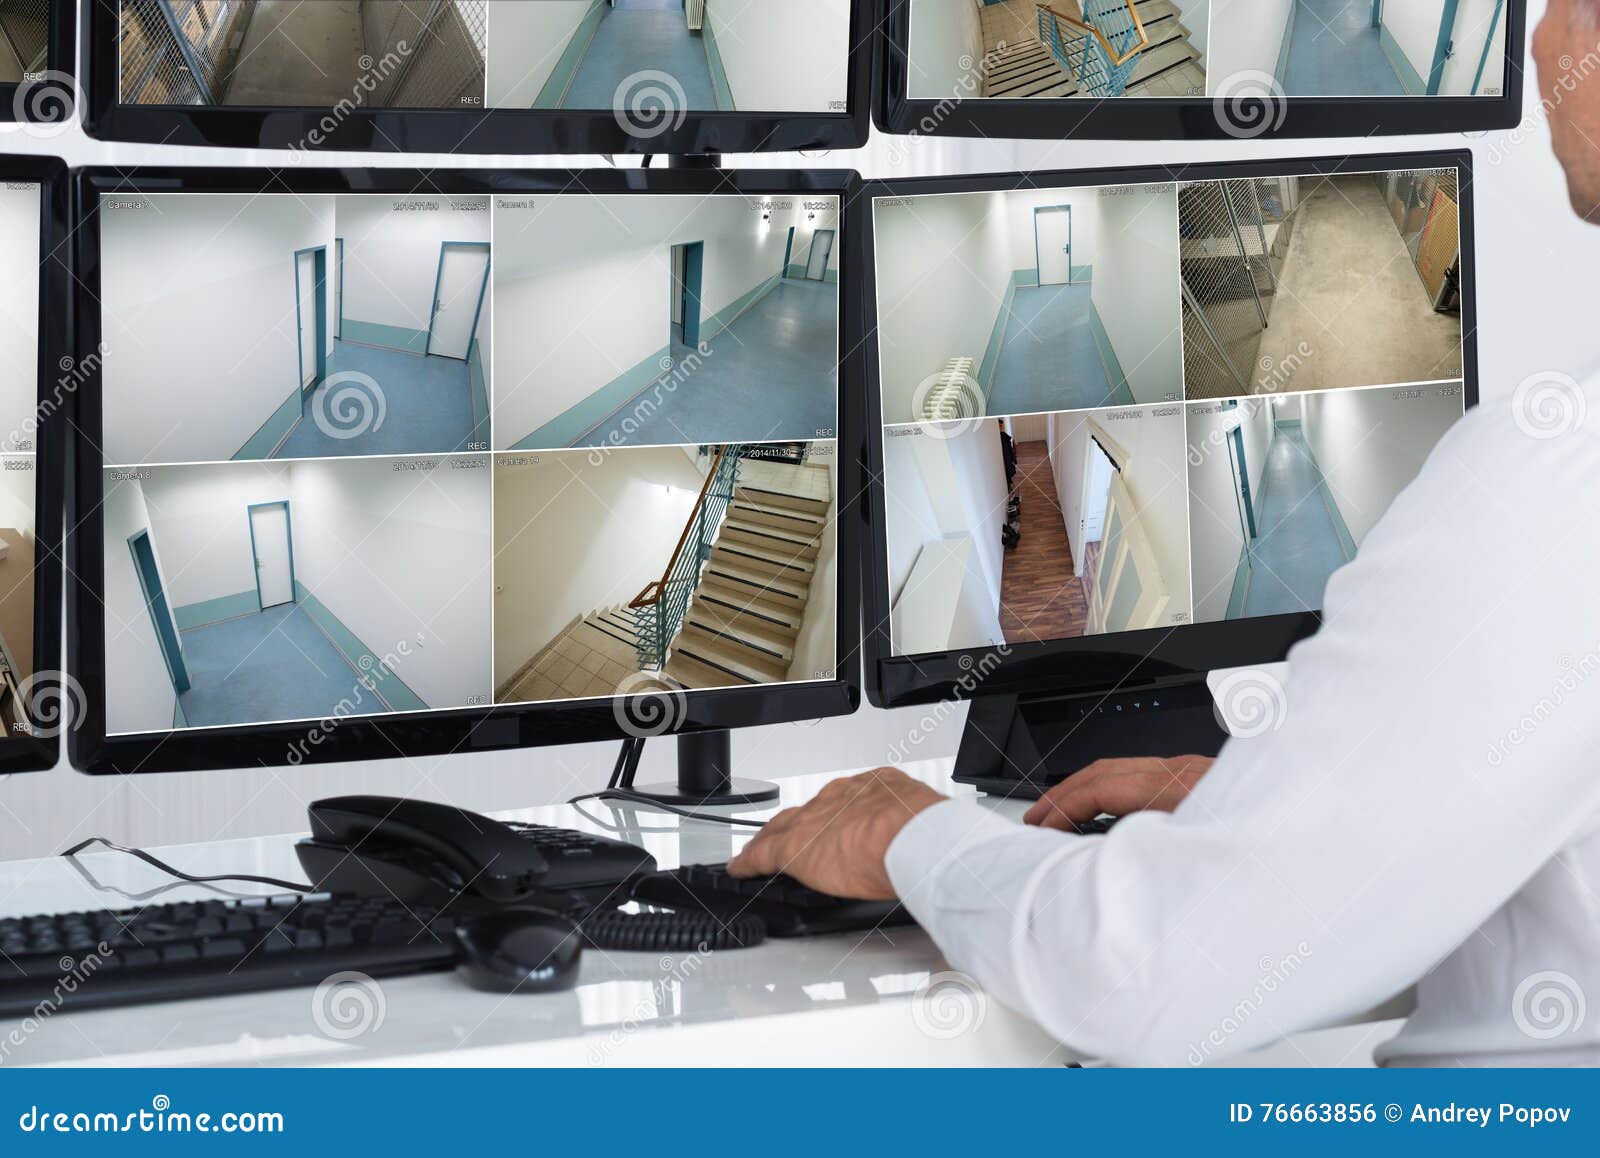 security system operator looking at cctv footage